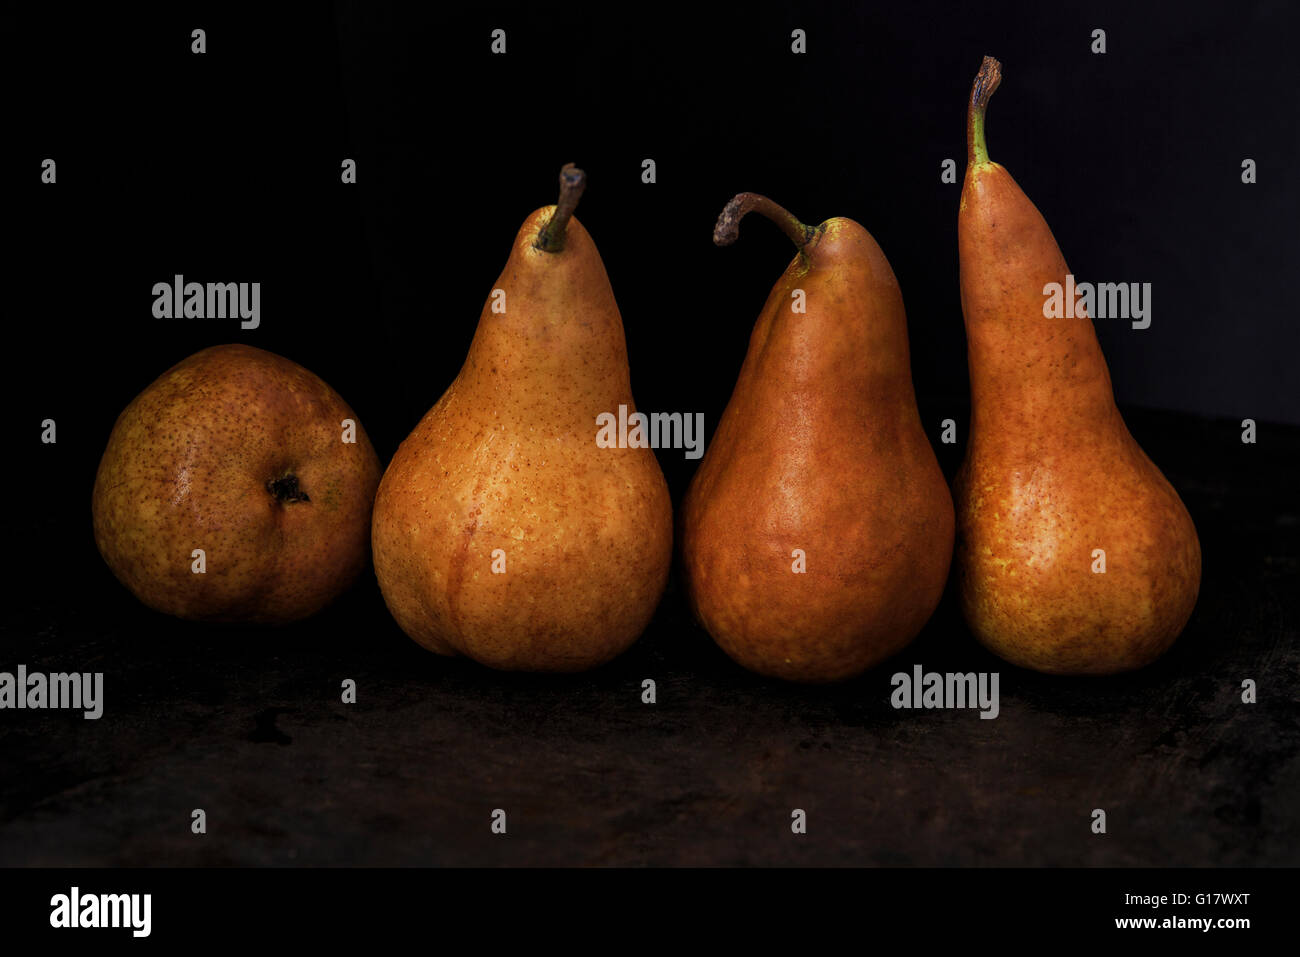 https://c8.alamy.com/comp/G17WXT/four-golden-brown-pears-with-little-tails-on-a-black-background-G17WXT.jpg